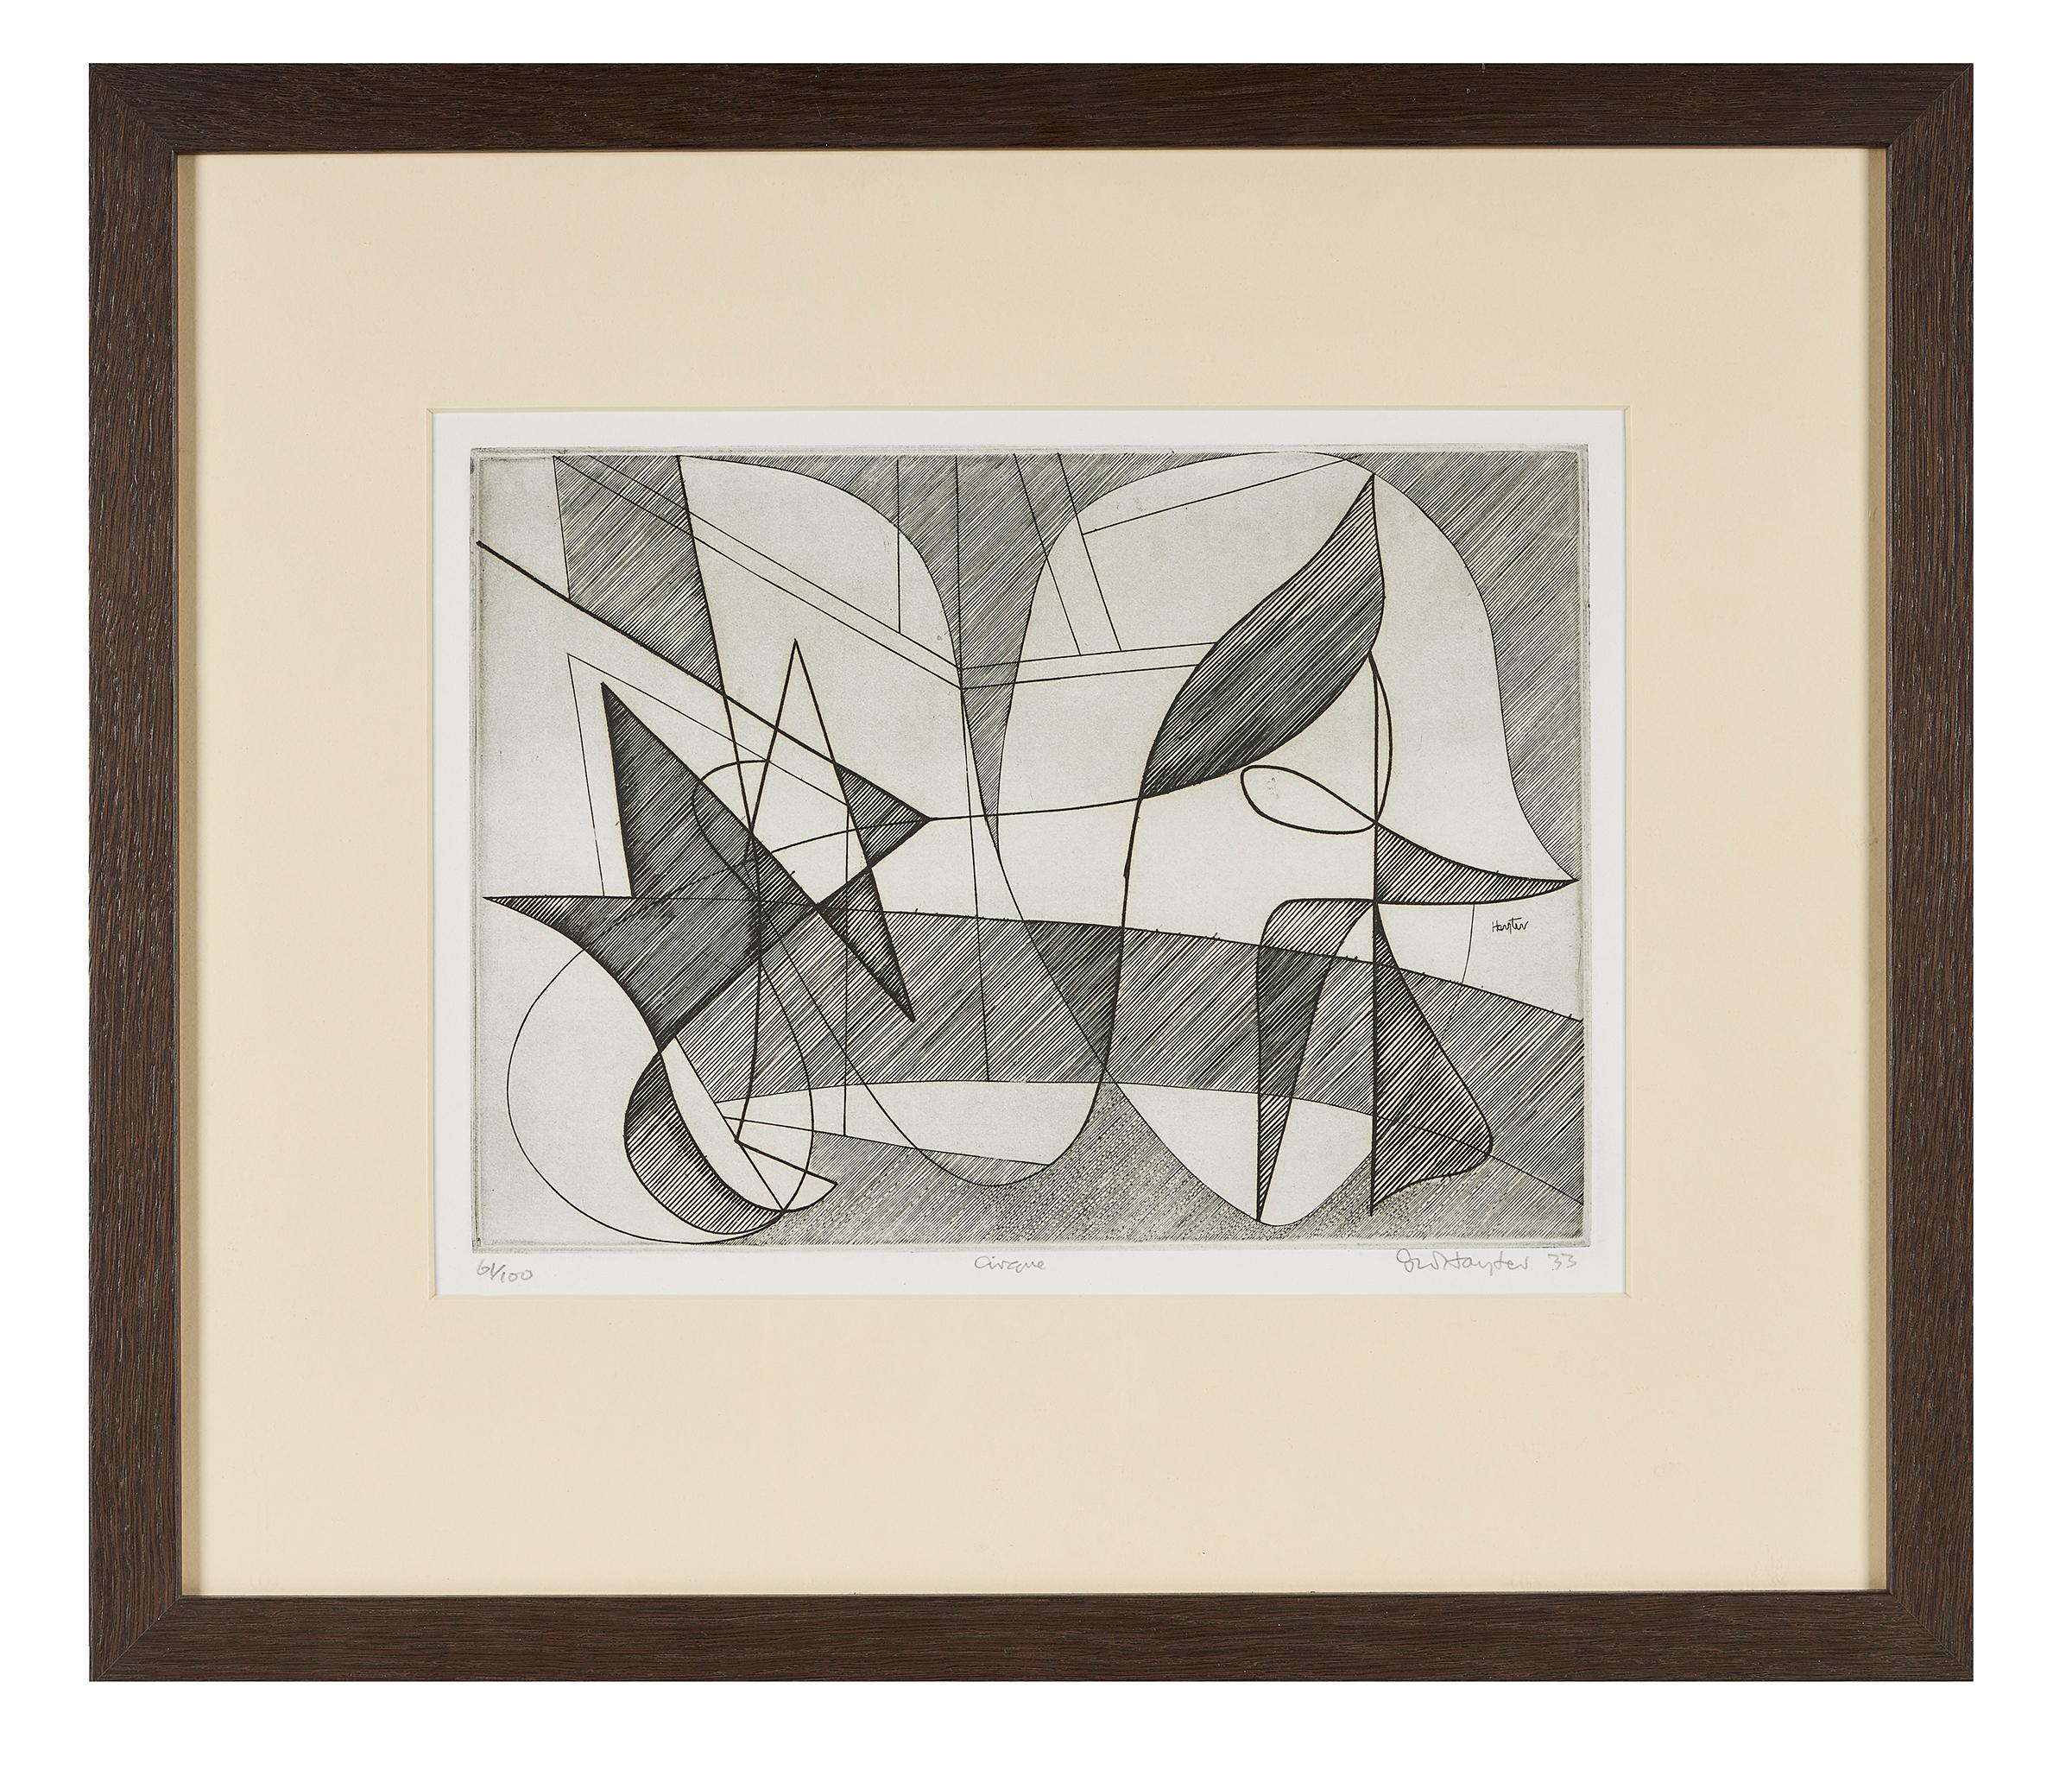 Stanley William Hayter (English, 1901-1988), 'Cirque', engraving, signed, inscribed with title, dated '33 but second edition 1973, and numbered 61/100 in pencil, framed.